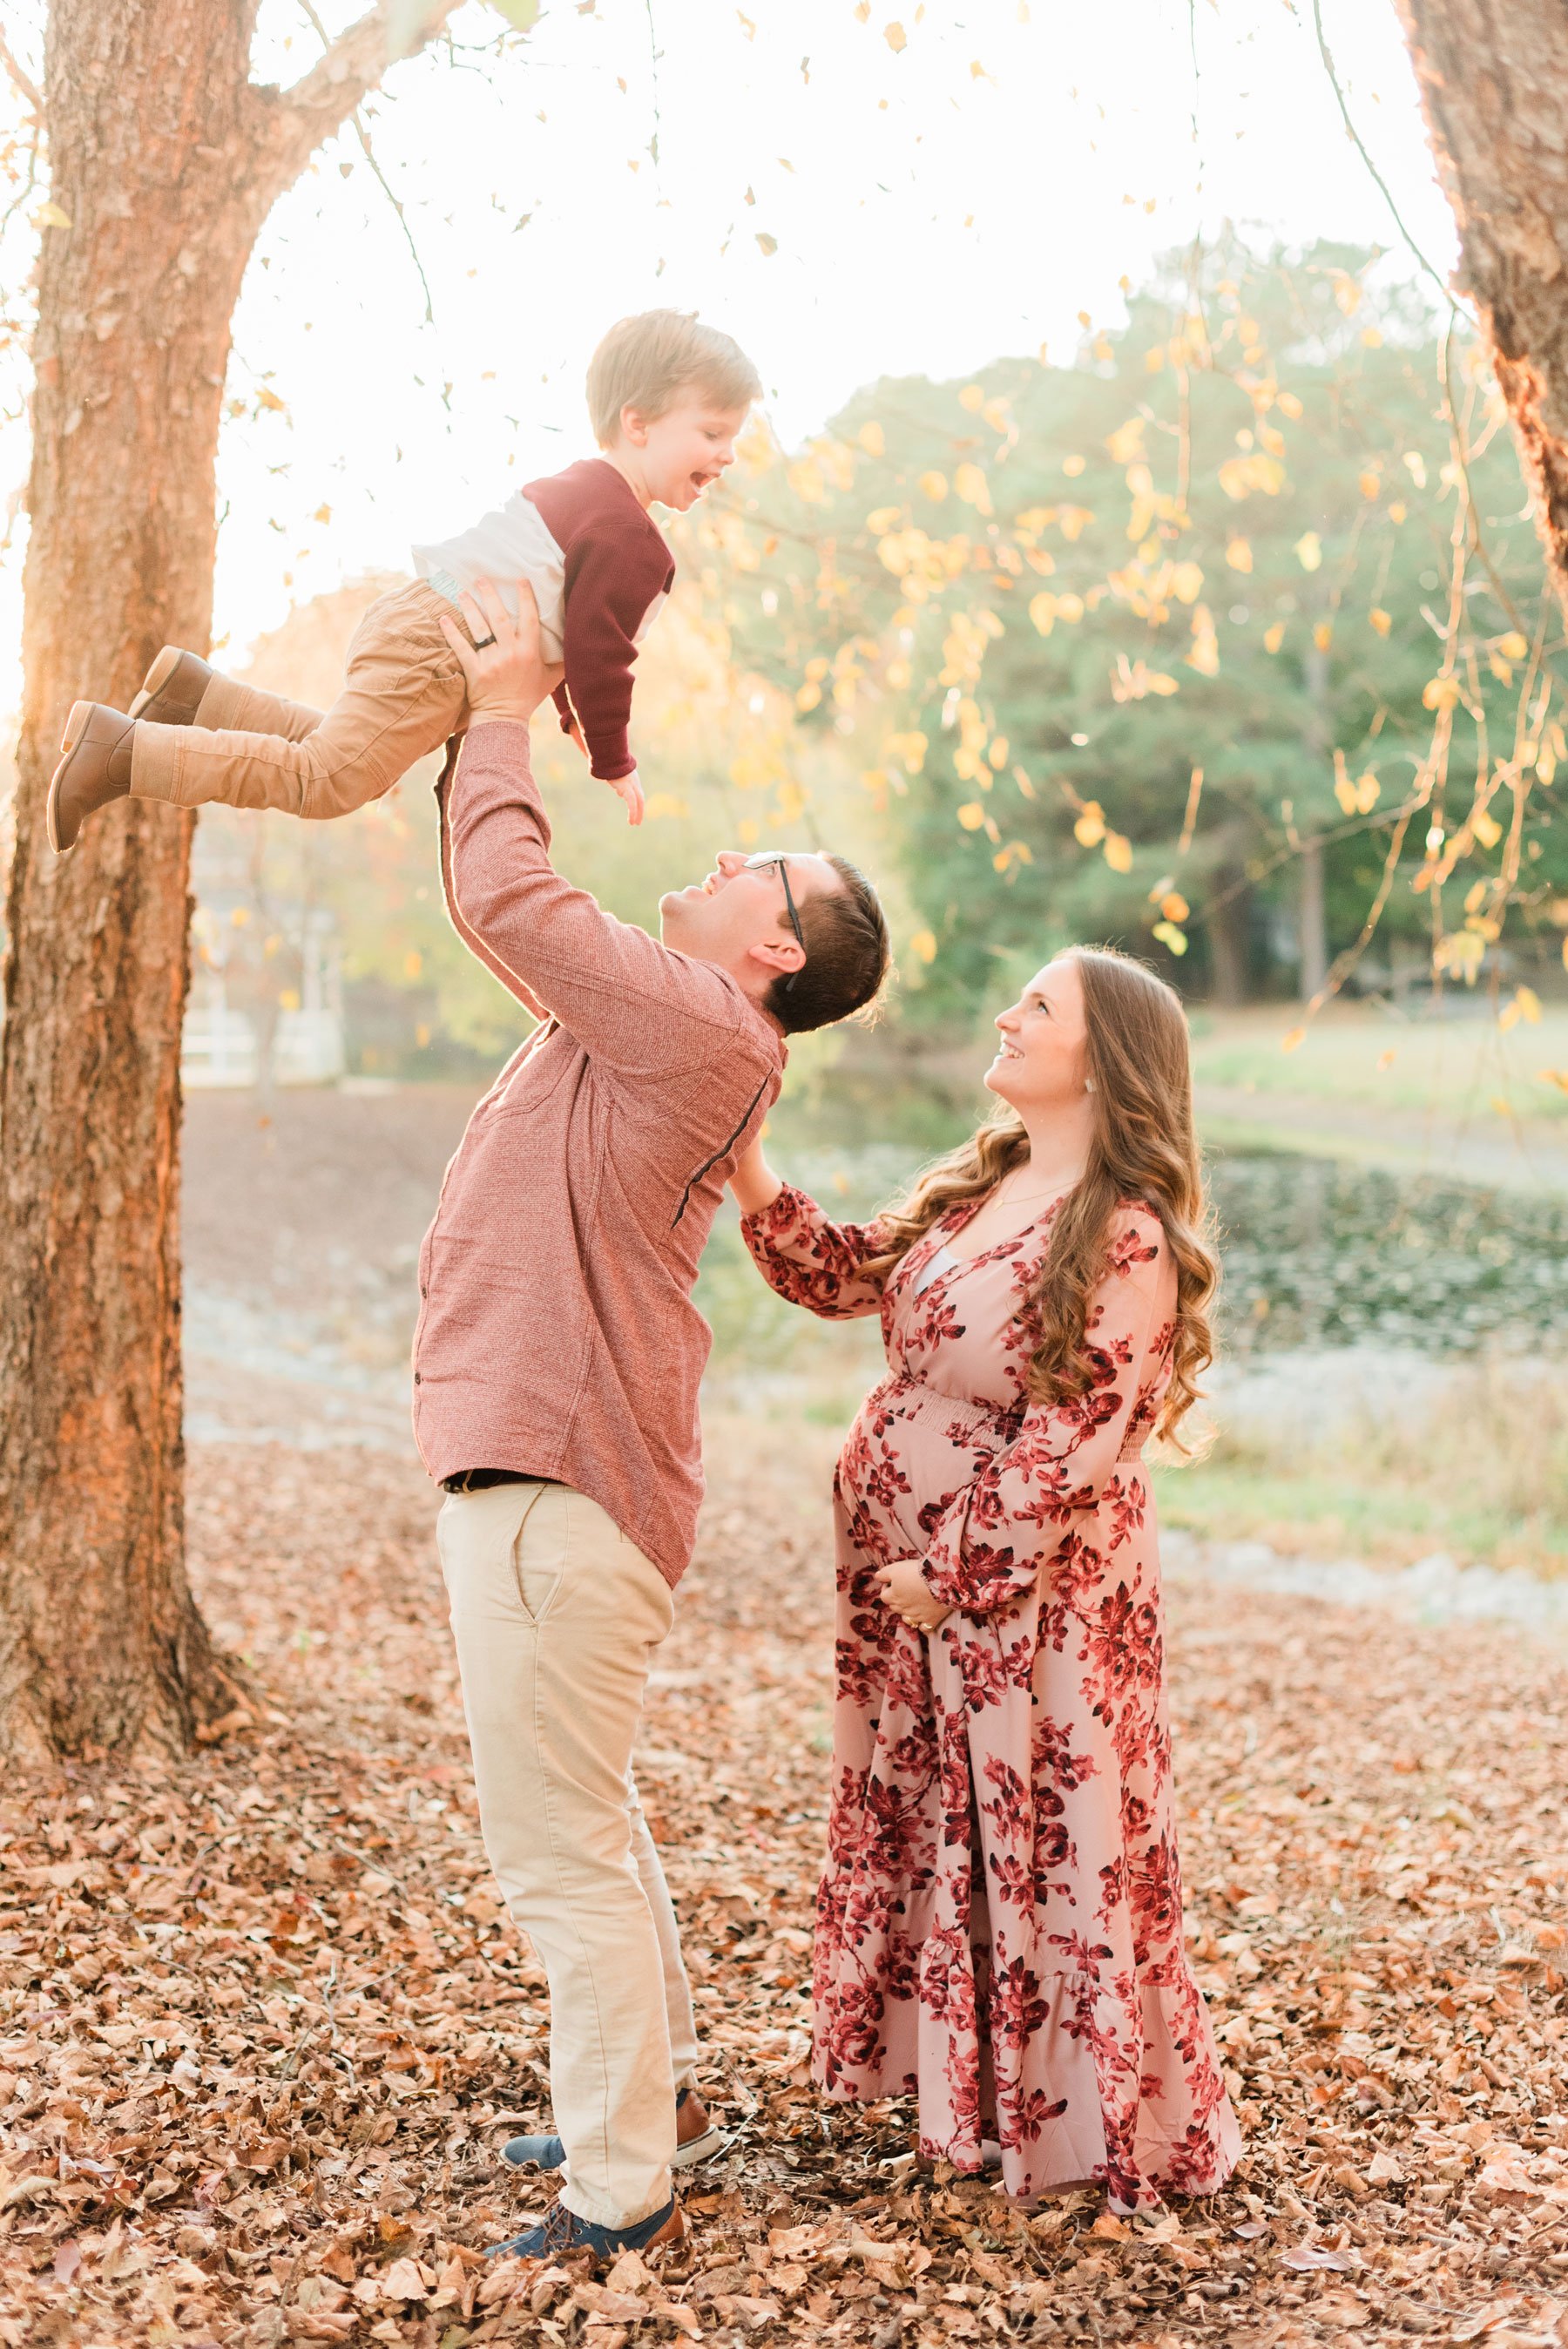  A father lifts his young son above him while his pregnant wife stands behind smiling up and him during their family maternity photo shoot. Georgia Maternity photos&nbsp; #familymaterintyphotos #pregnacyphotoshoot #familyof4 #peachtreecity #atlantafa